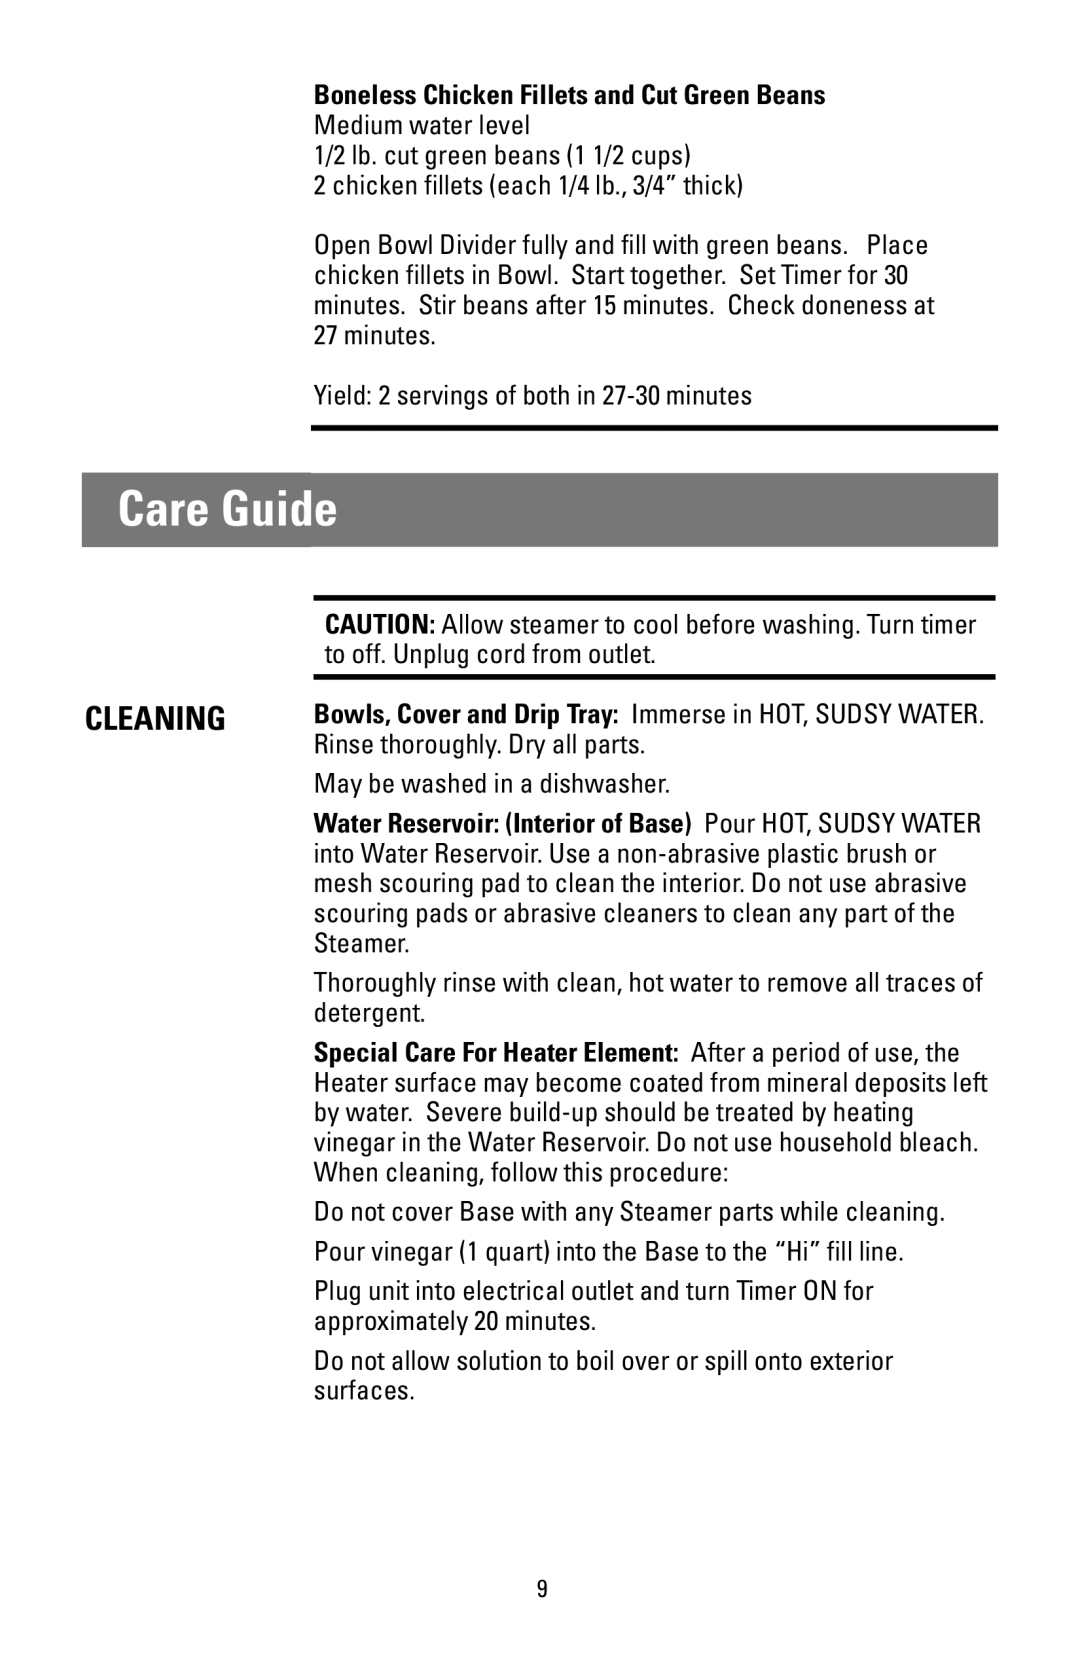 Black & Decker HS90 manual Care Guide, Cleaning, Boneless Chicken Fillets and Cut Green Beans 